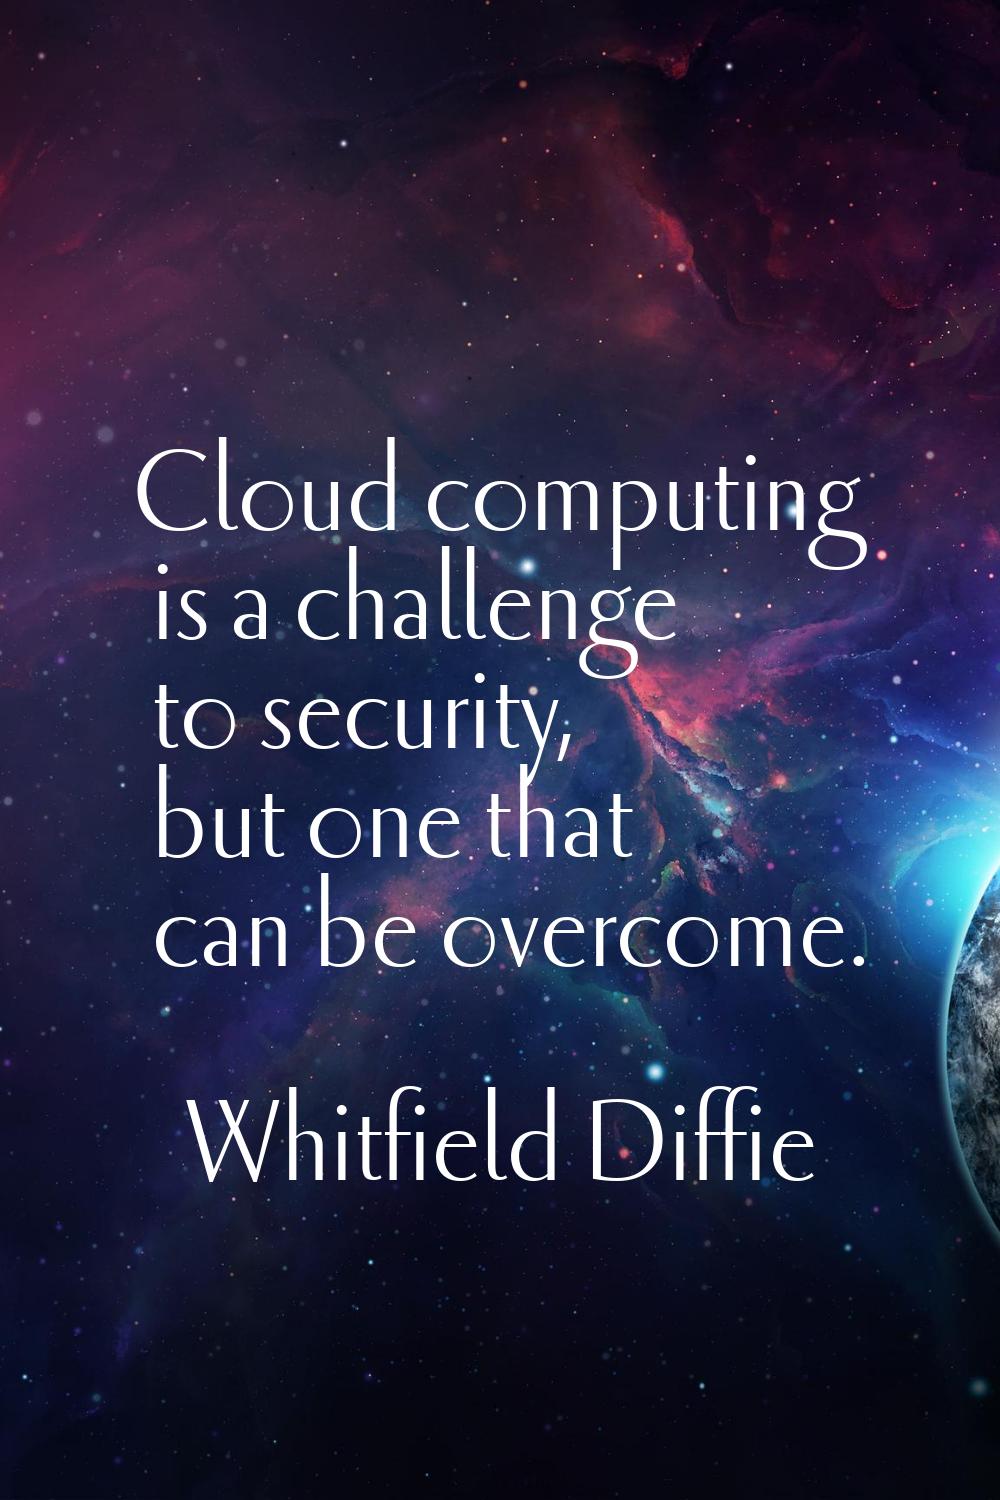 Cloud computing is a challenge to security, but one that can be overcome.